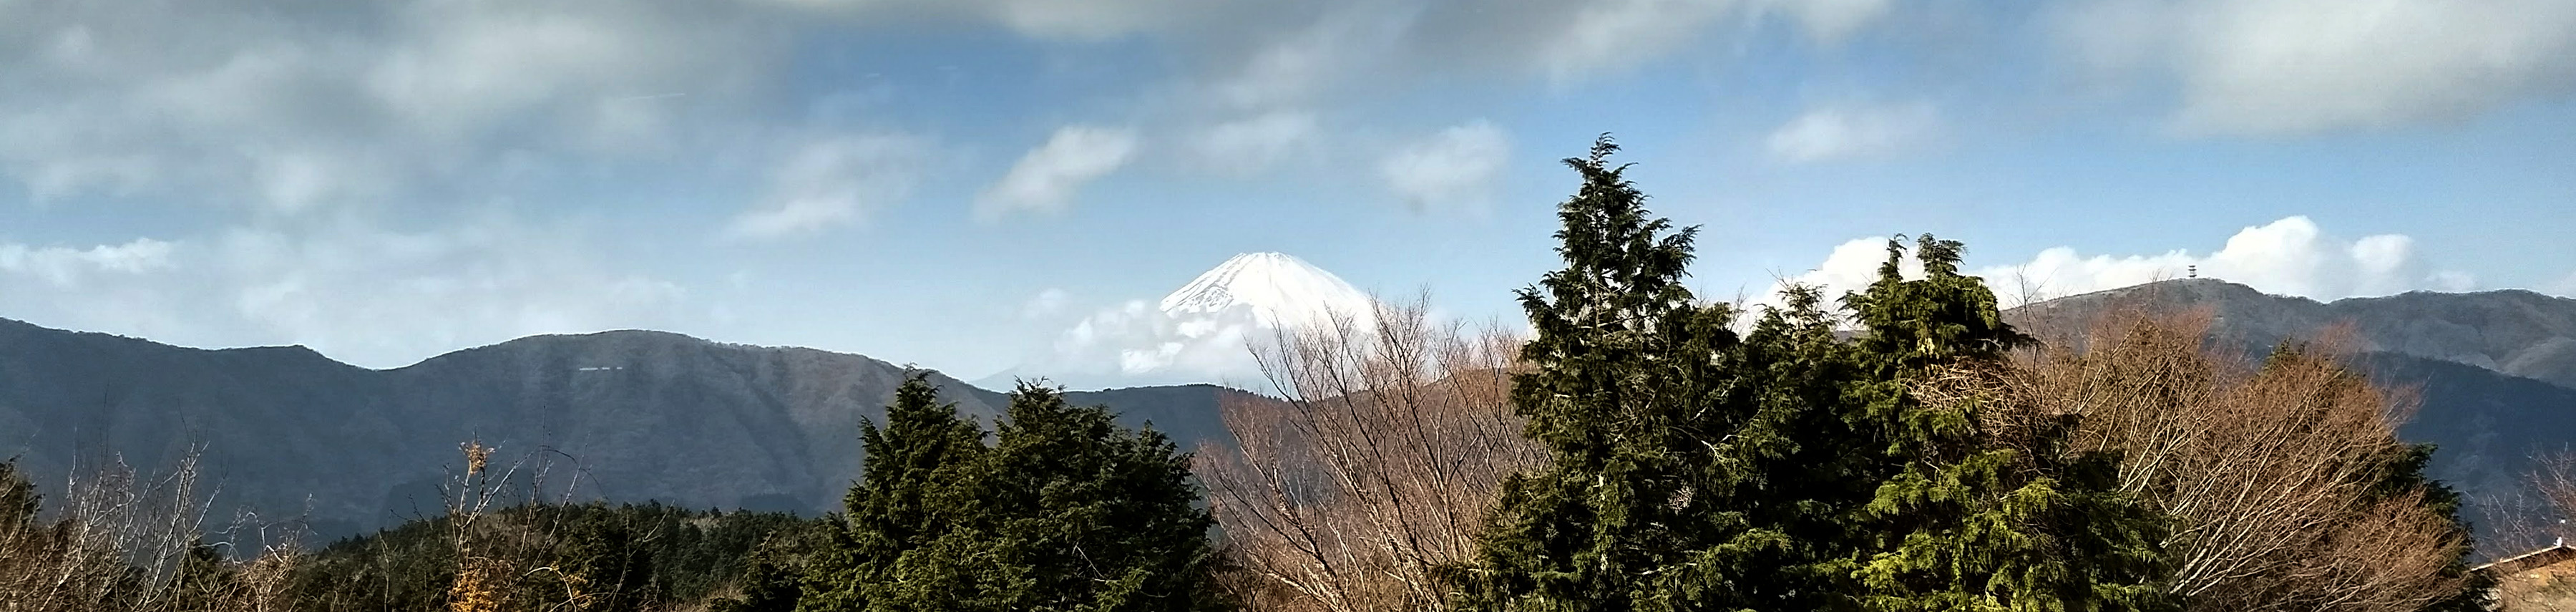 Looking for a view of Mt. Fuji